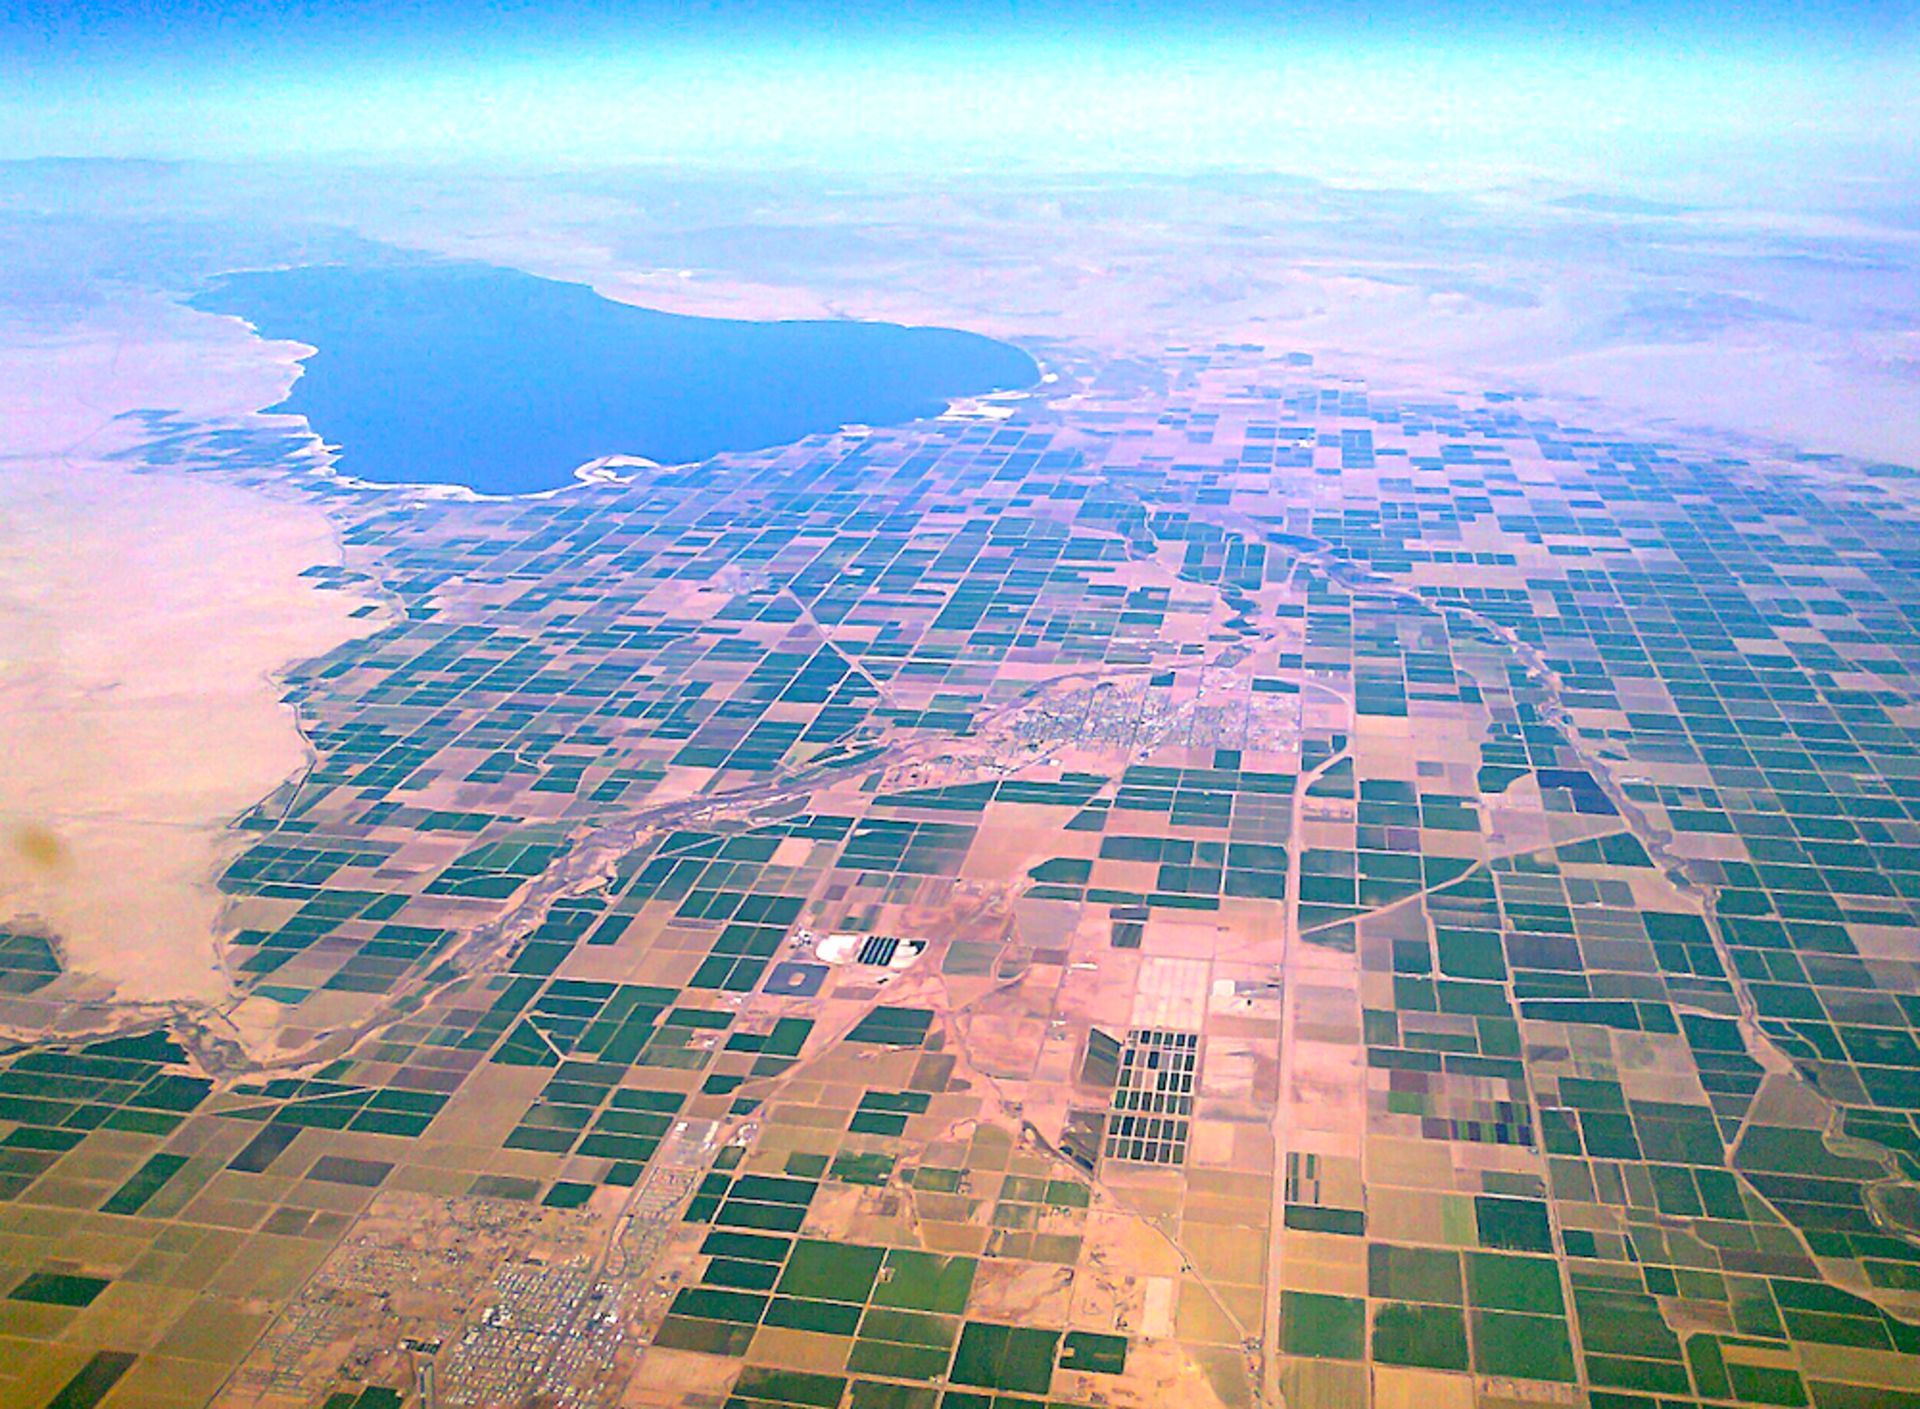 Almost 12 Acres in Southern California: Discover Imperial County's Potential by the Salton Sea! - Image 11 of 14